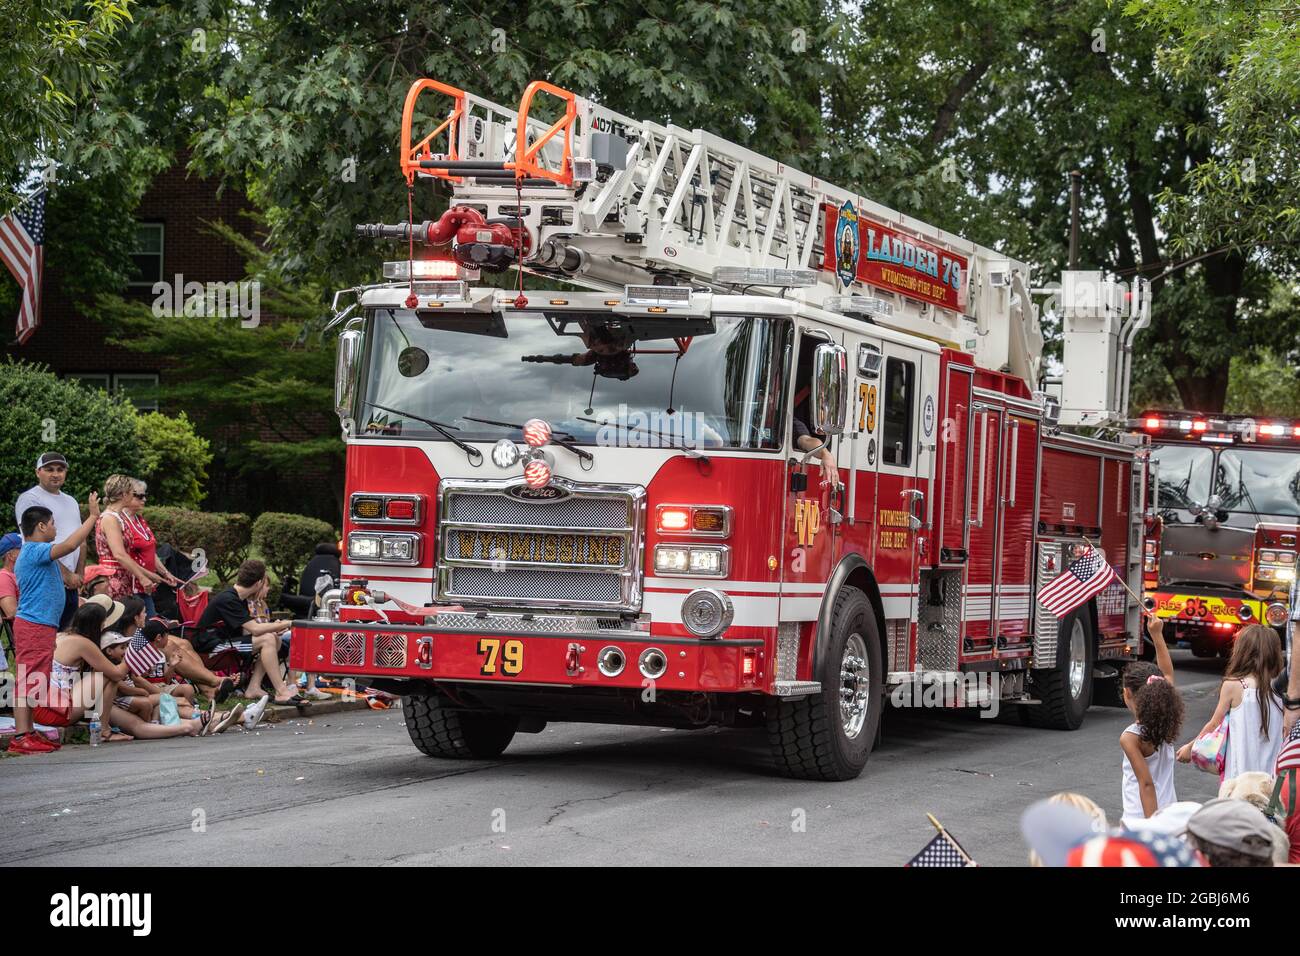 Wyomissing, Pennsylvania,-July 4, 2021: Families watch annual Independence Day Parade with Fire Trucks Stock Photo